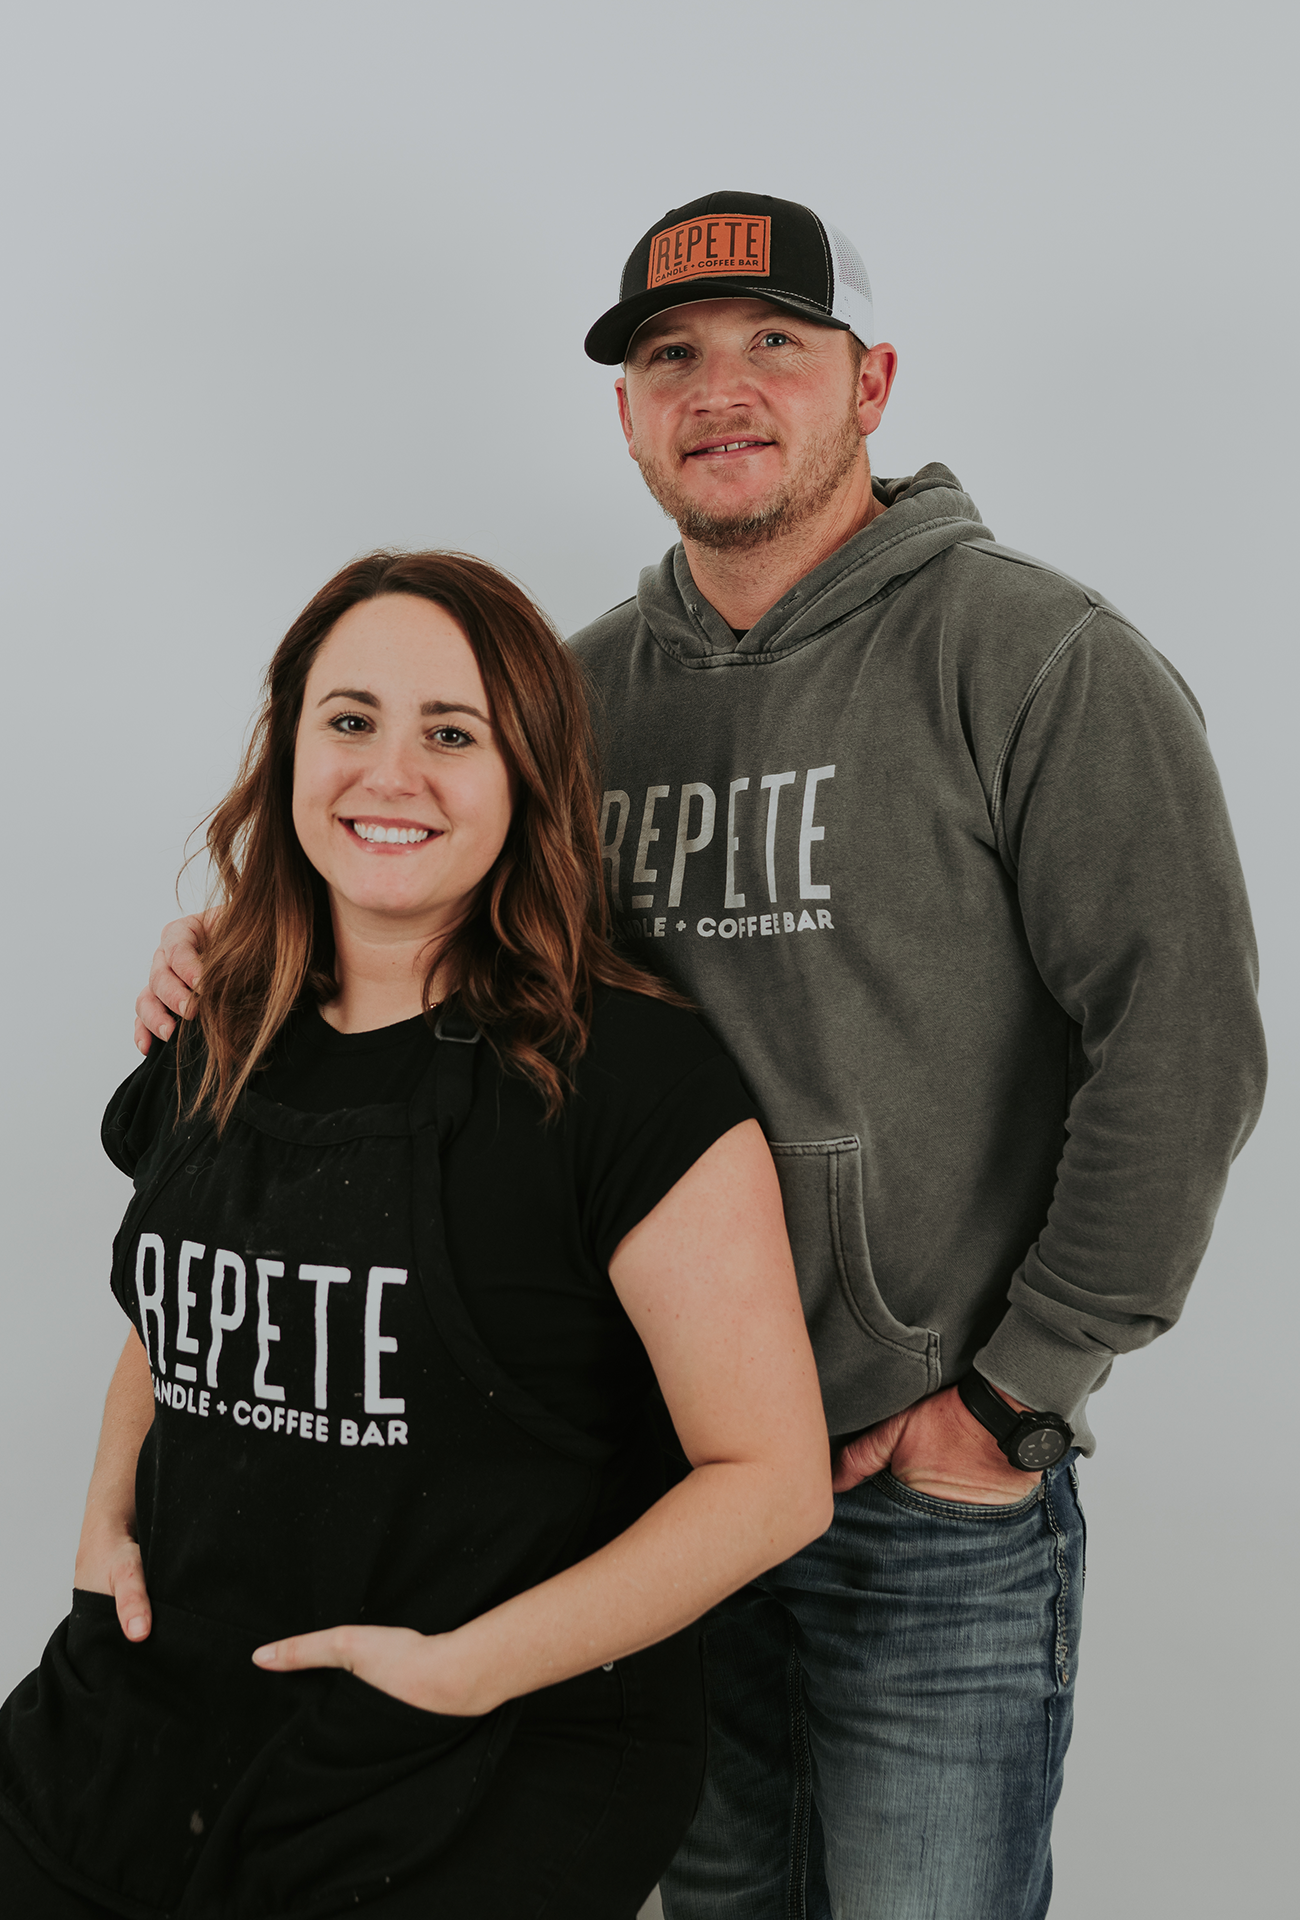 Repete candle and coffee bar owners in Warsaw, Illinois